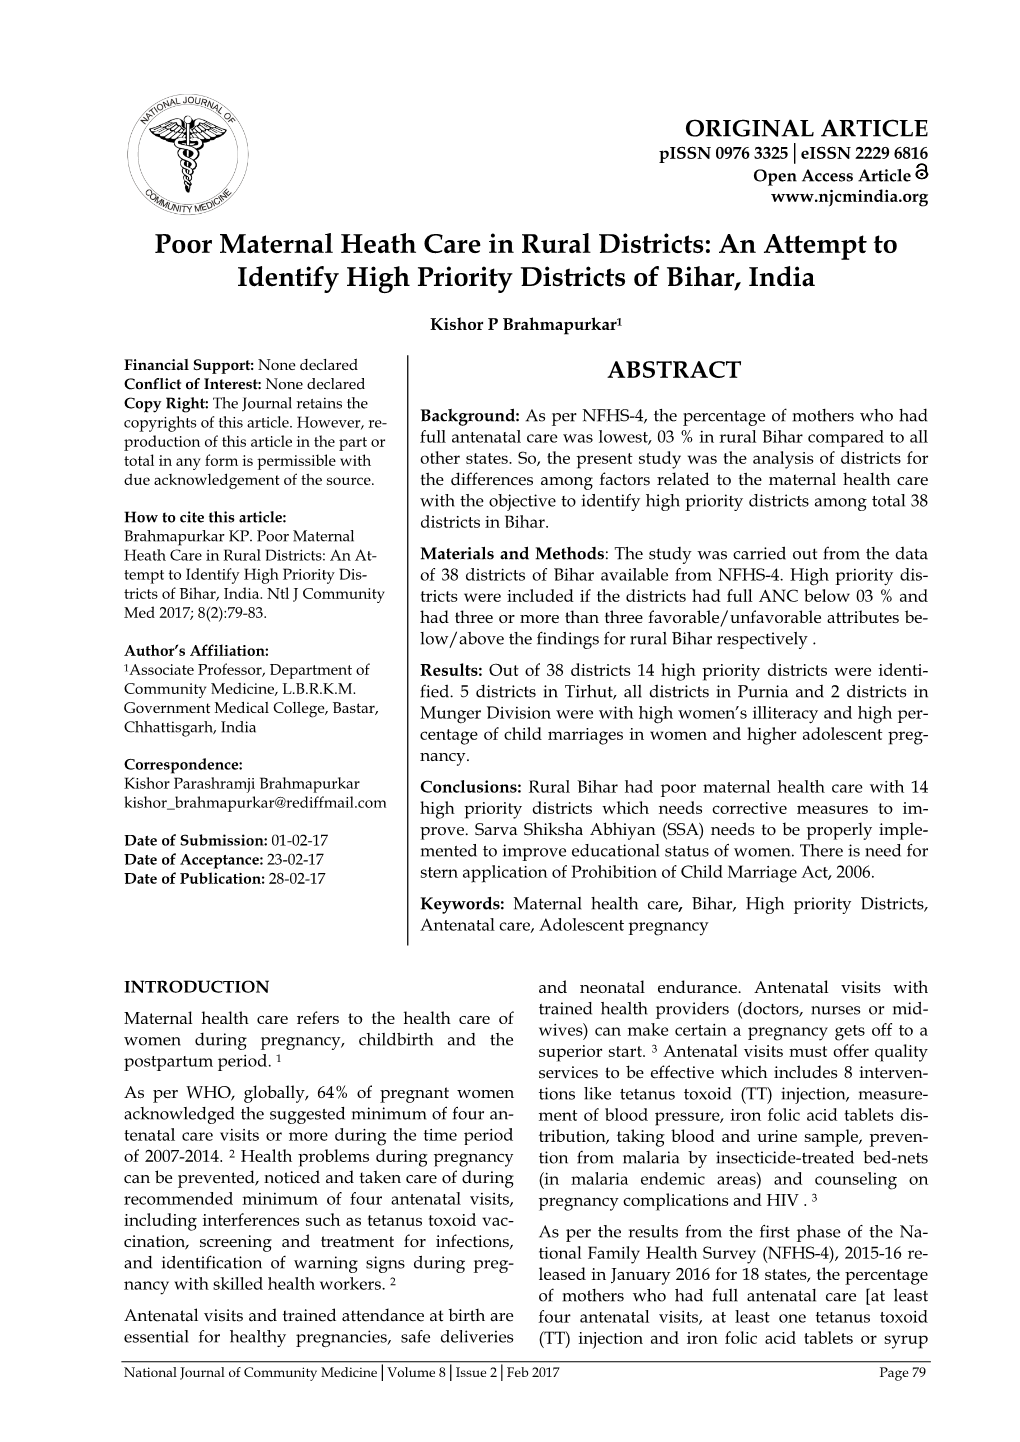 Poor Maternal Heath Care in Rural Districts: an Attempt to Identify High Priority Districts of Bihar, India